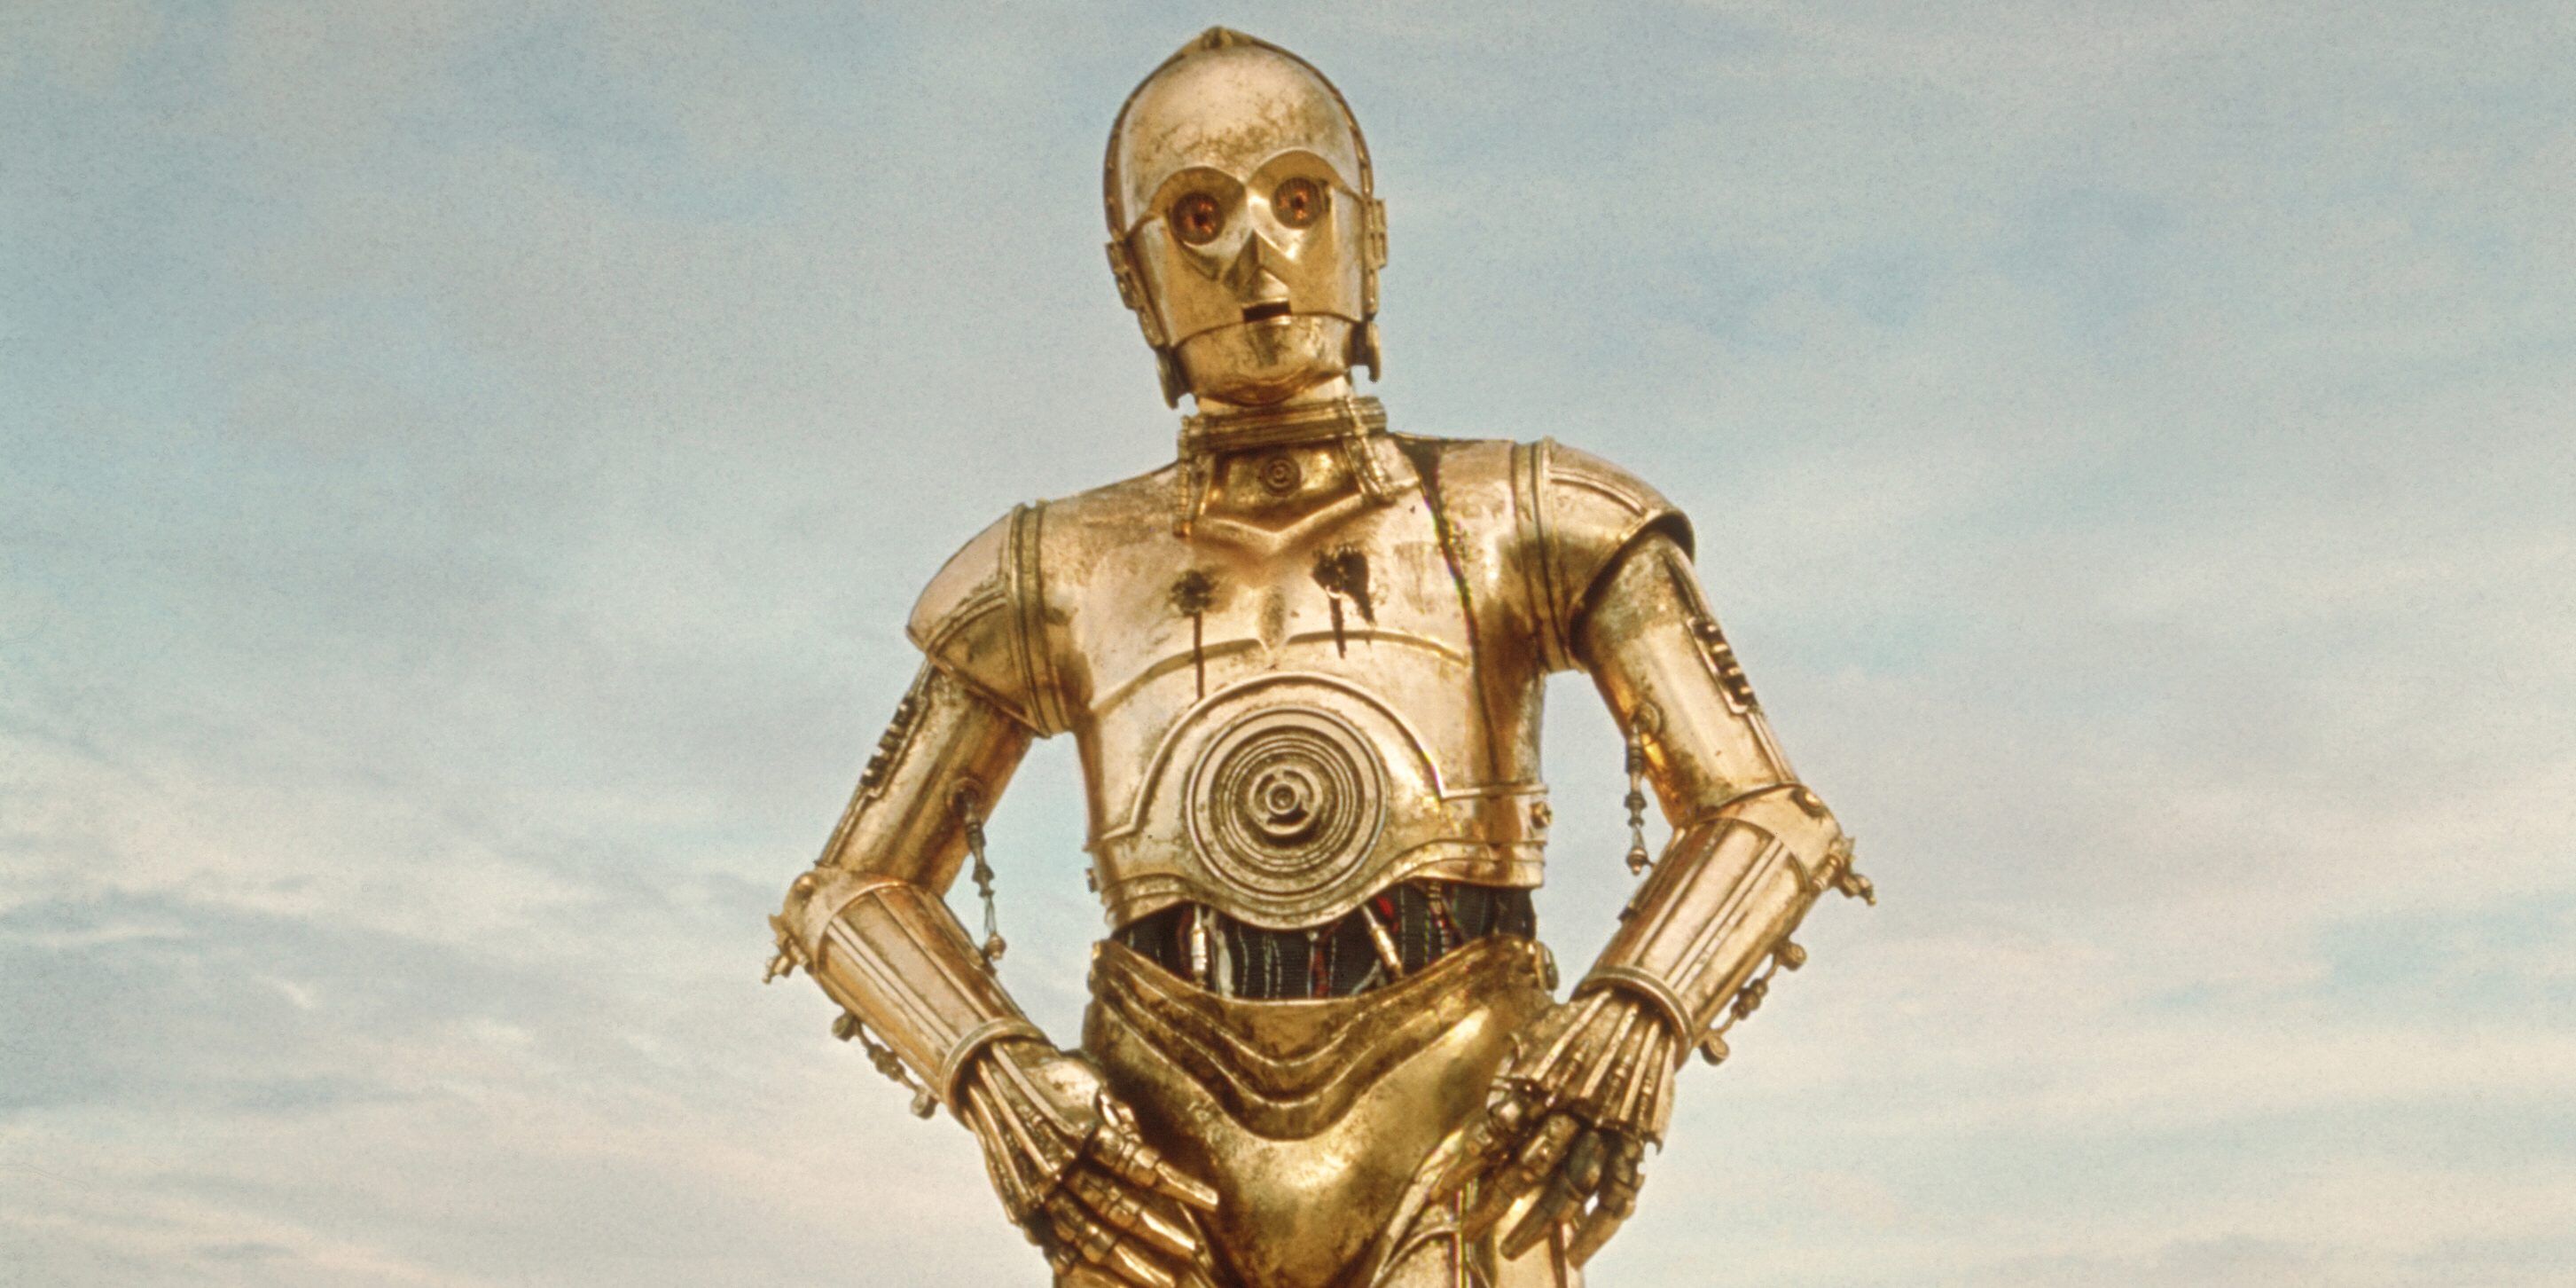 Star Wars Anthony Daniels Says He Will Never Stop Playing C3PO